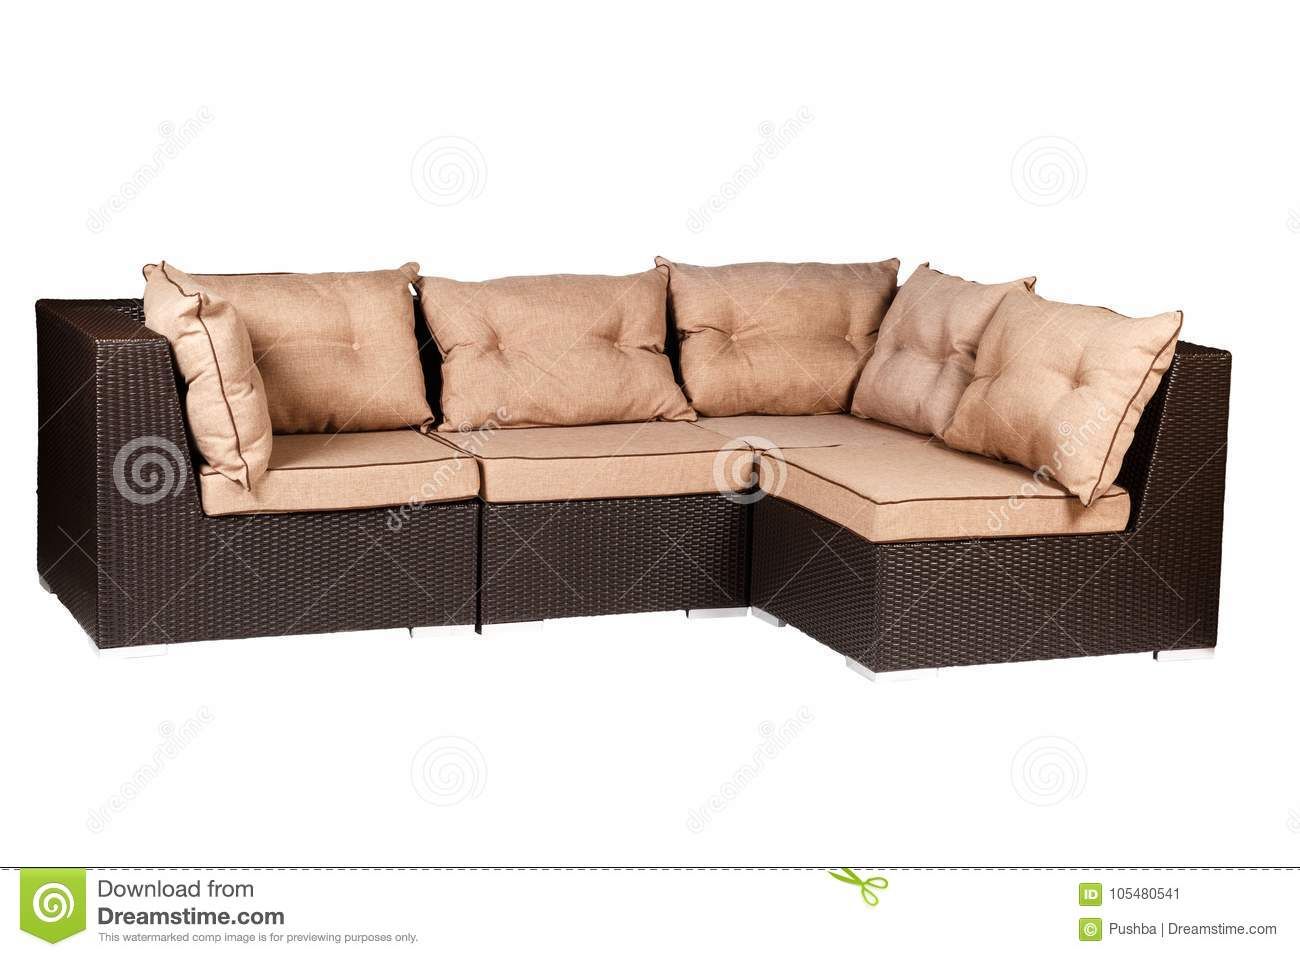 Wicker Sofa With Linen Cushions In Sand Color Stock Image In Setoril Modern Sectional Sofa Swith Chaise Woven Linen (View 10 of 15)